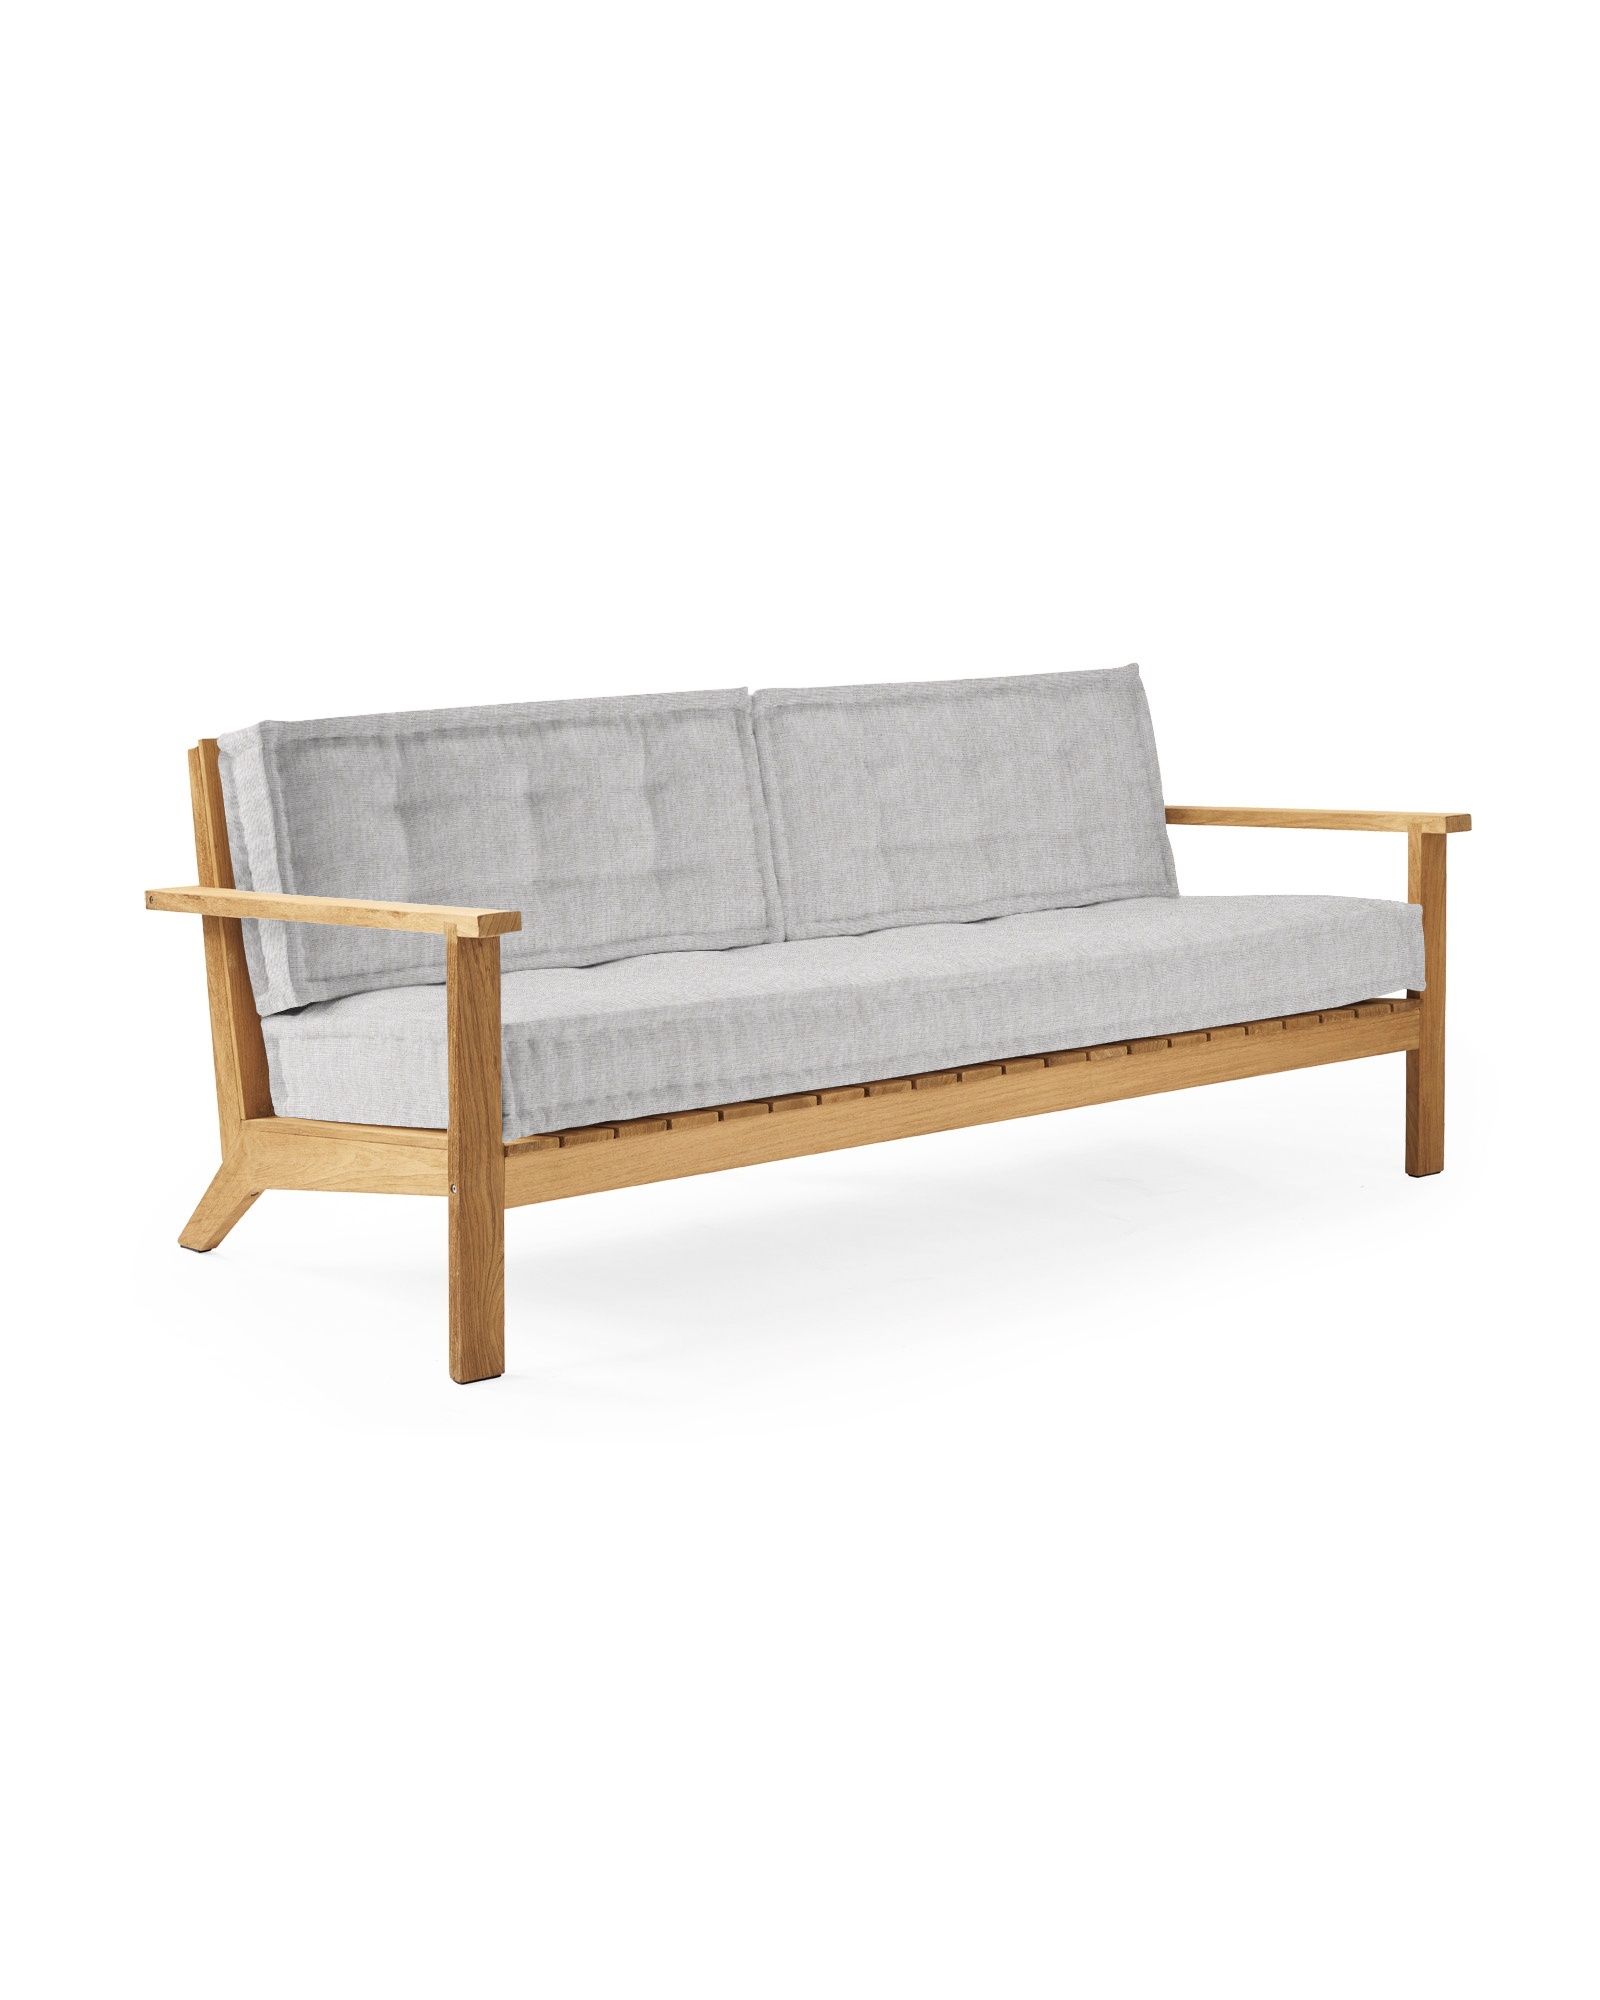 Cliffside Teak Sofa | Serena and Lily